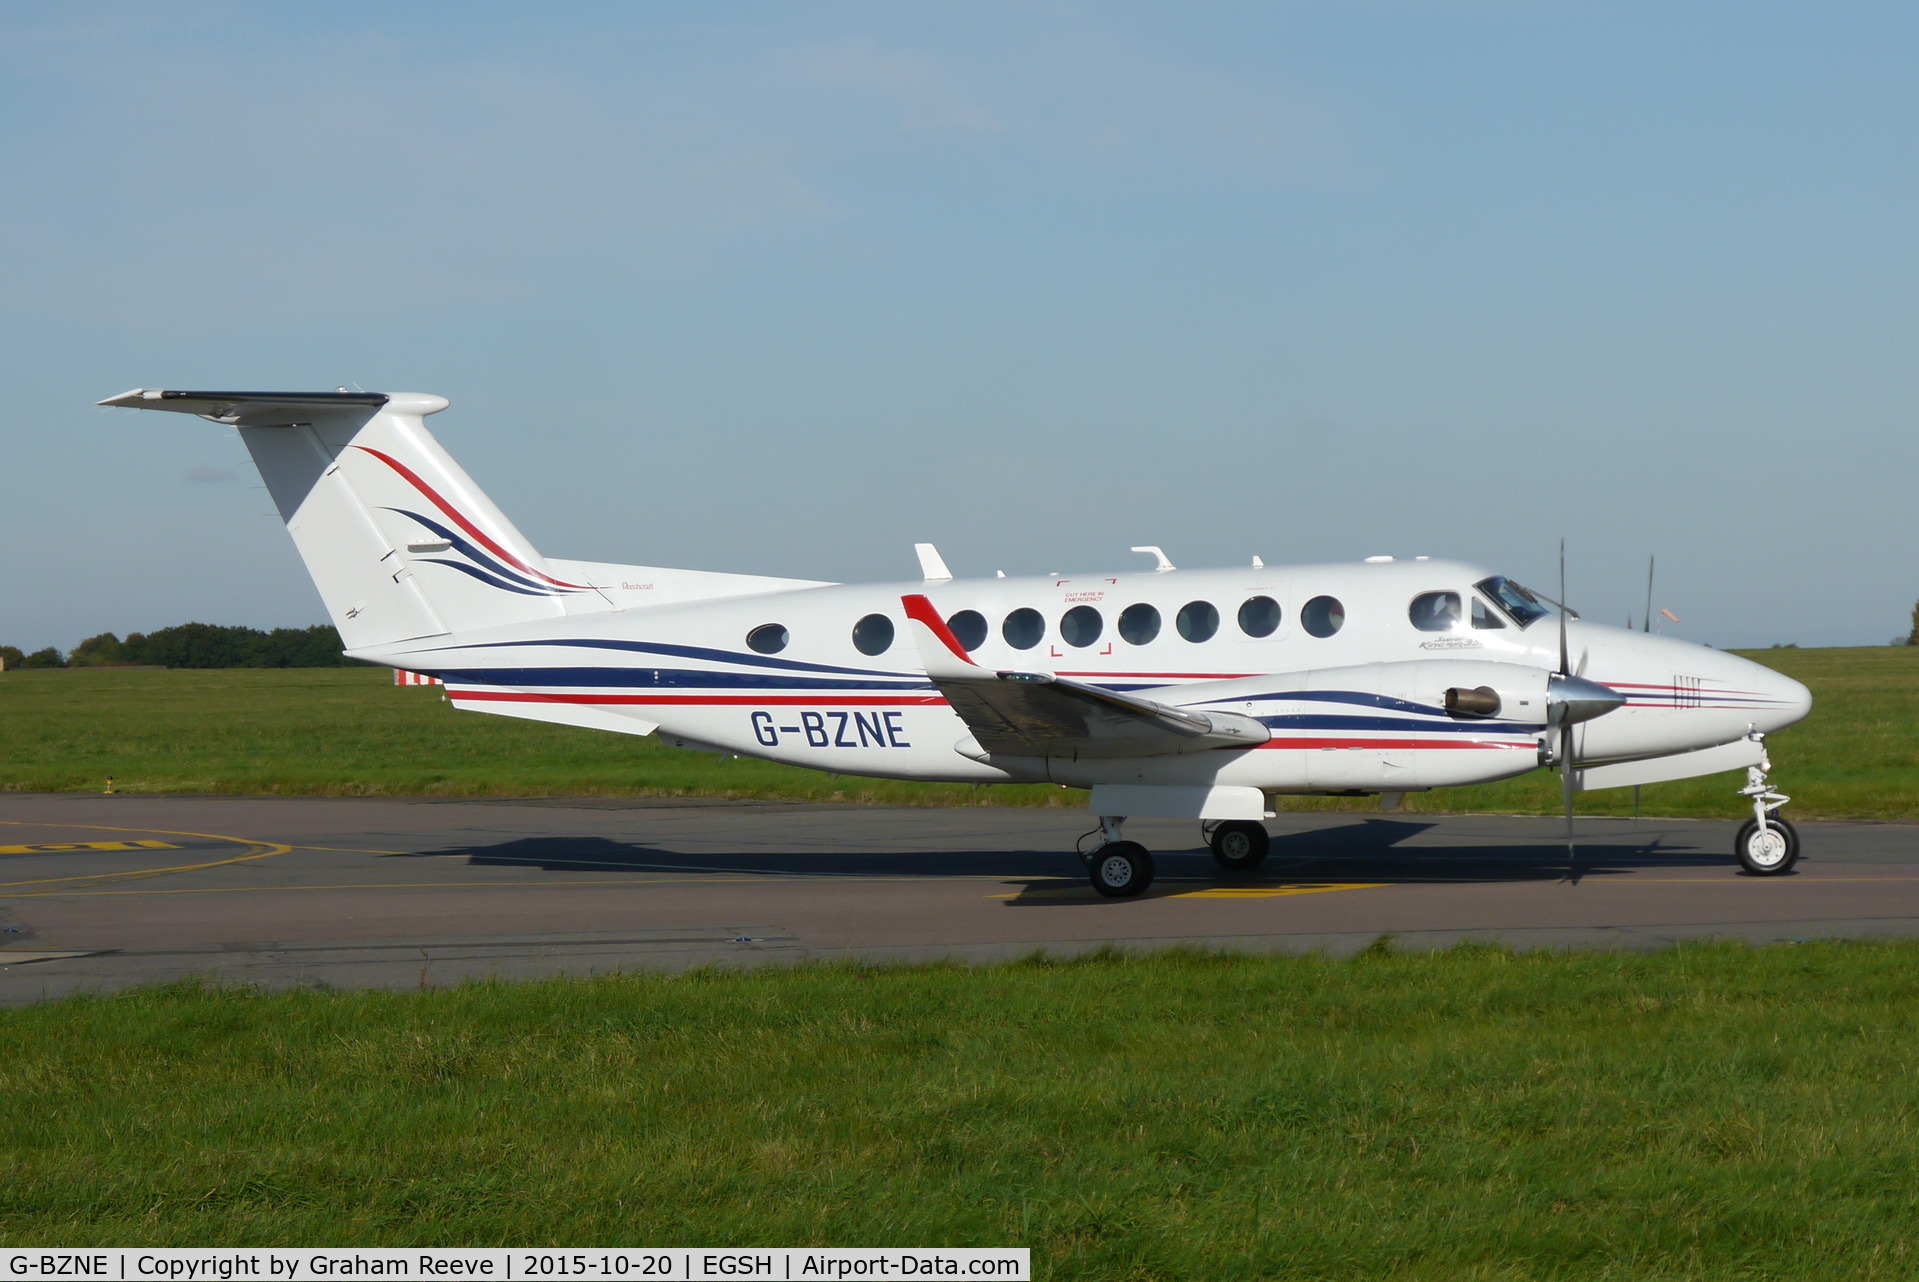 G-BZNE, 2000 Raytheon King Air 350 (B300) C/N FL-286, About to depart from Norwich.